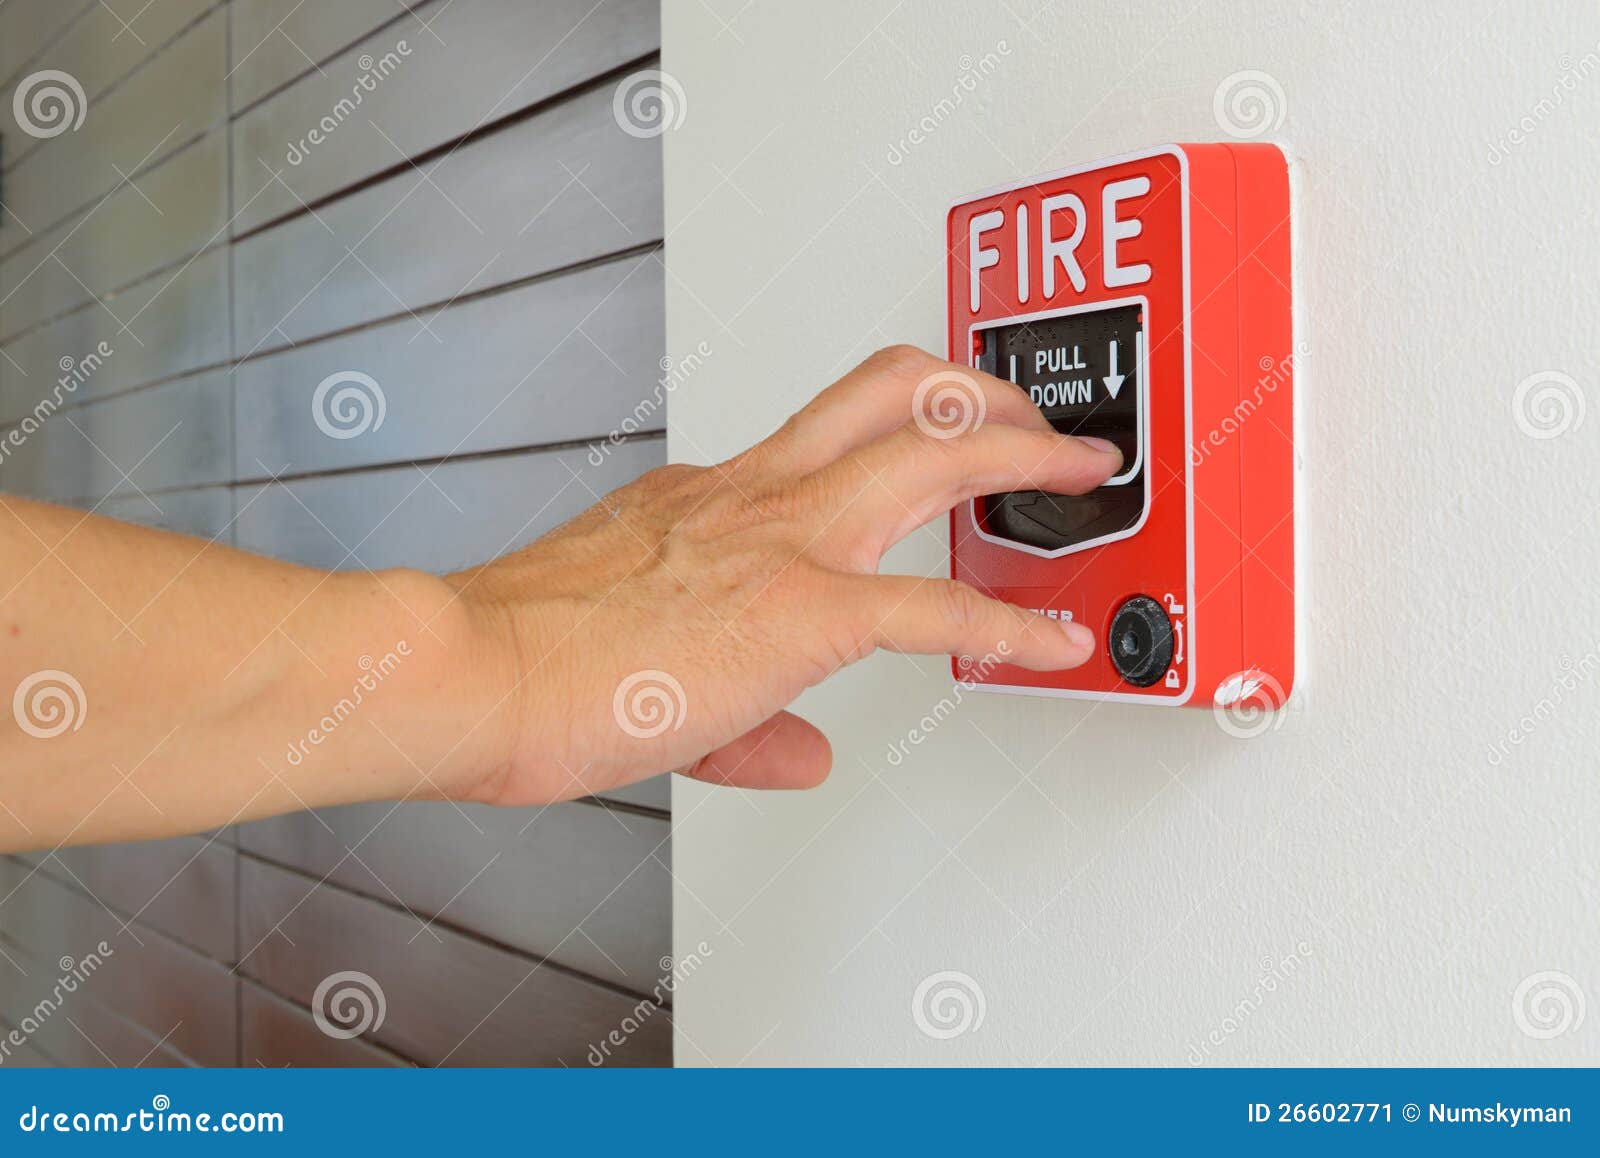 the hand of man is pulling fire alarm